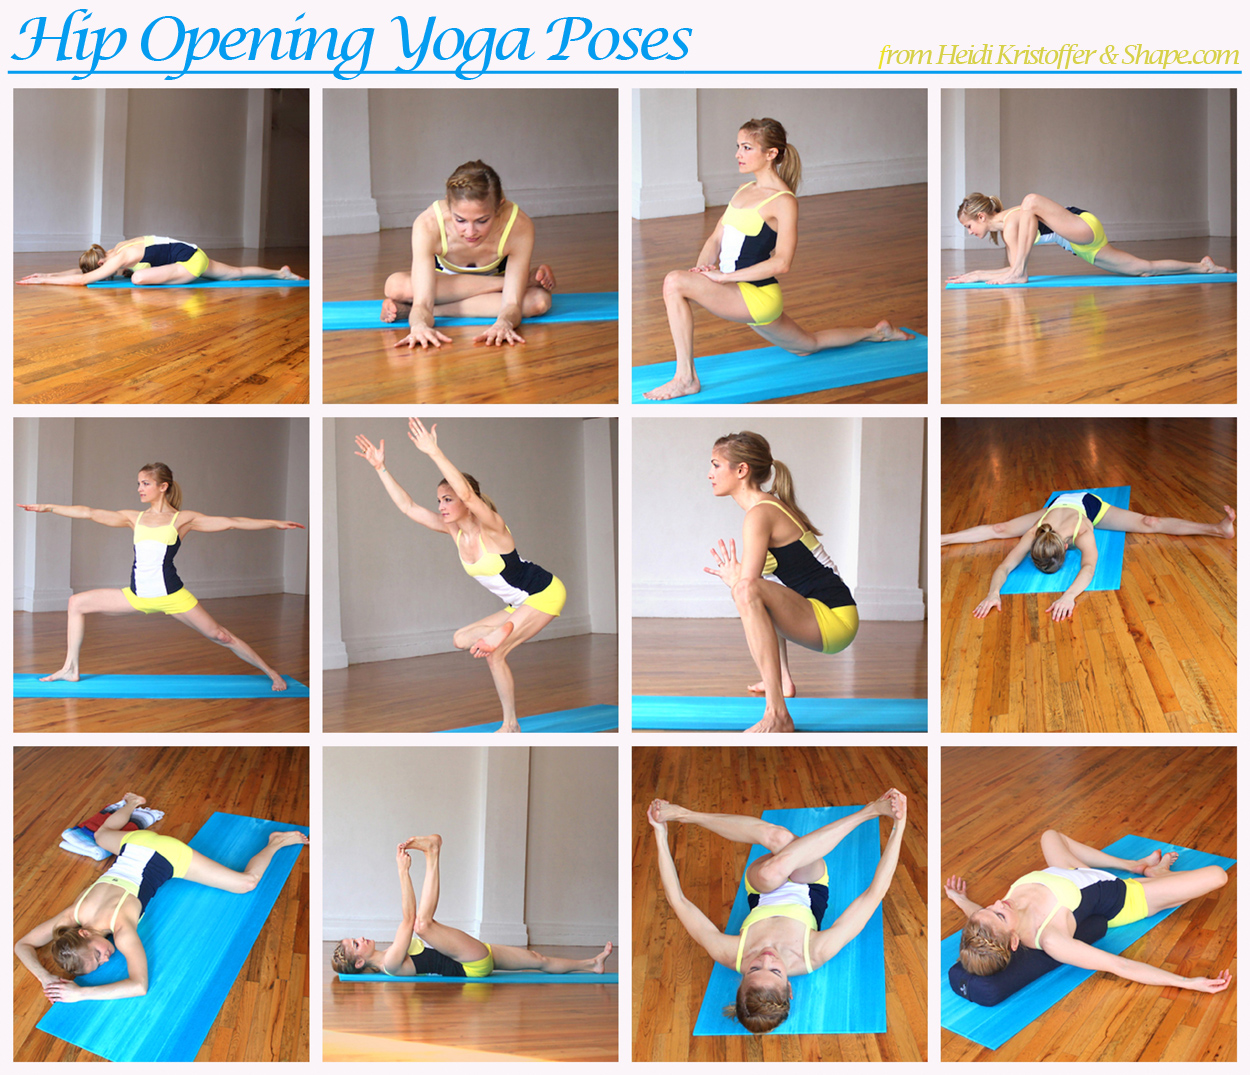 Hip Opening poses by Heidi Kristoffer on Shape - Healing Touch Charlotte